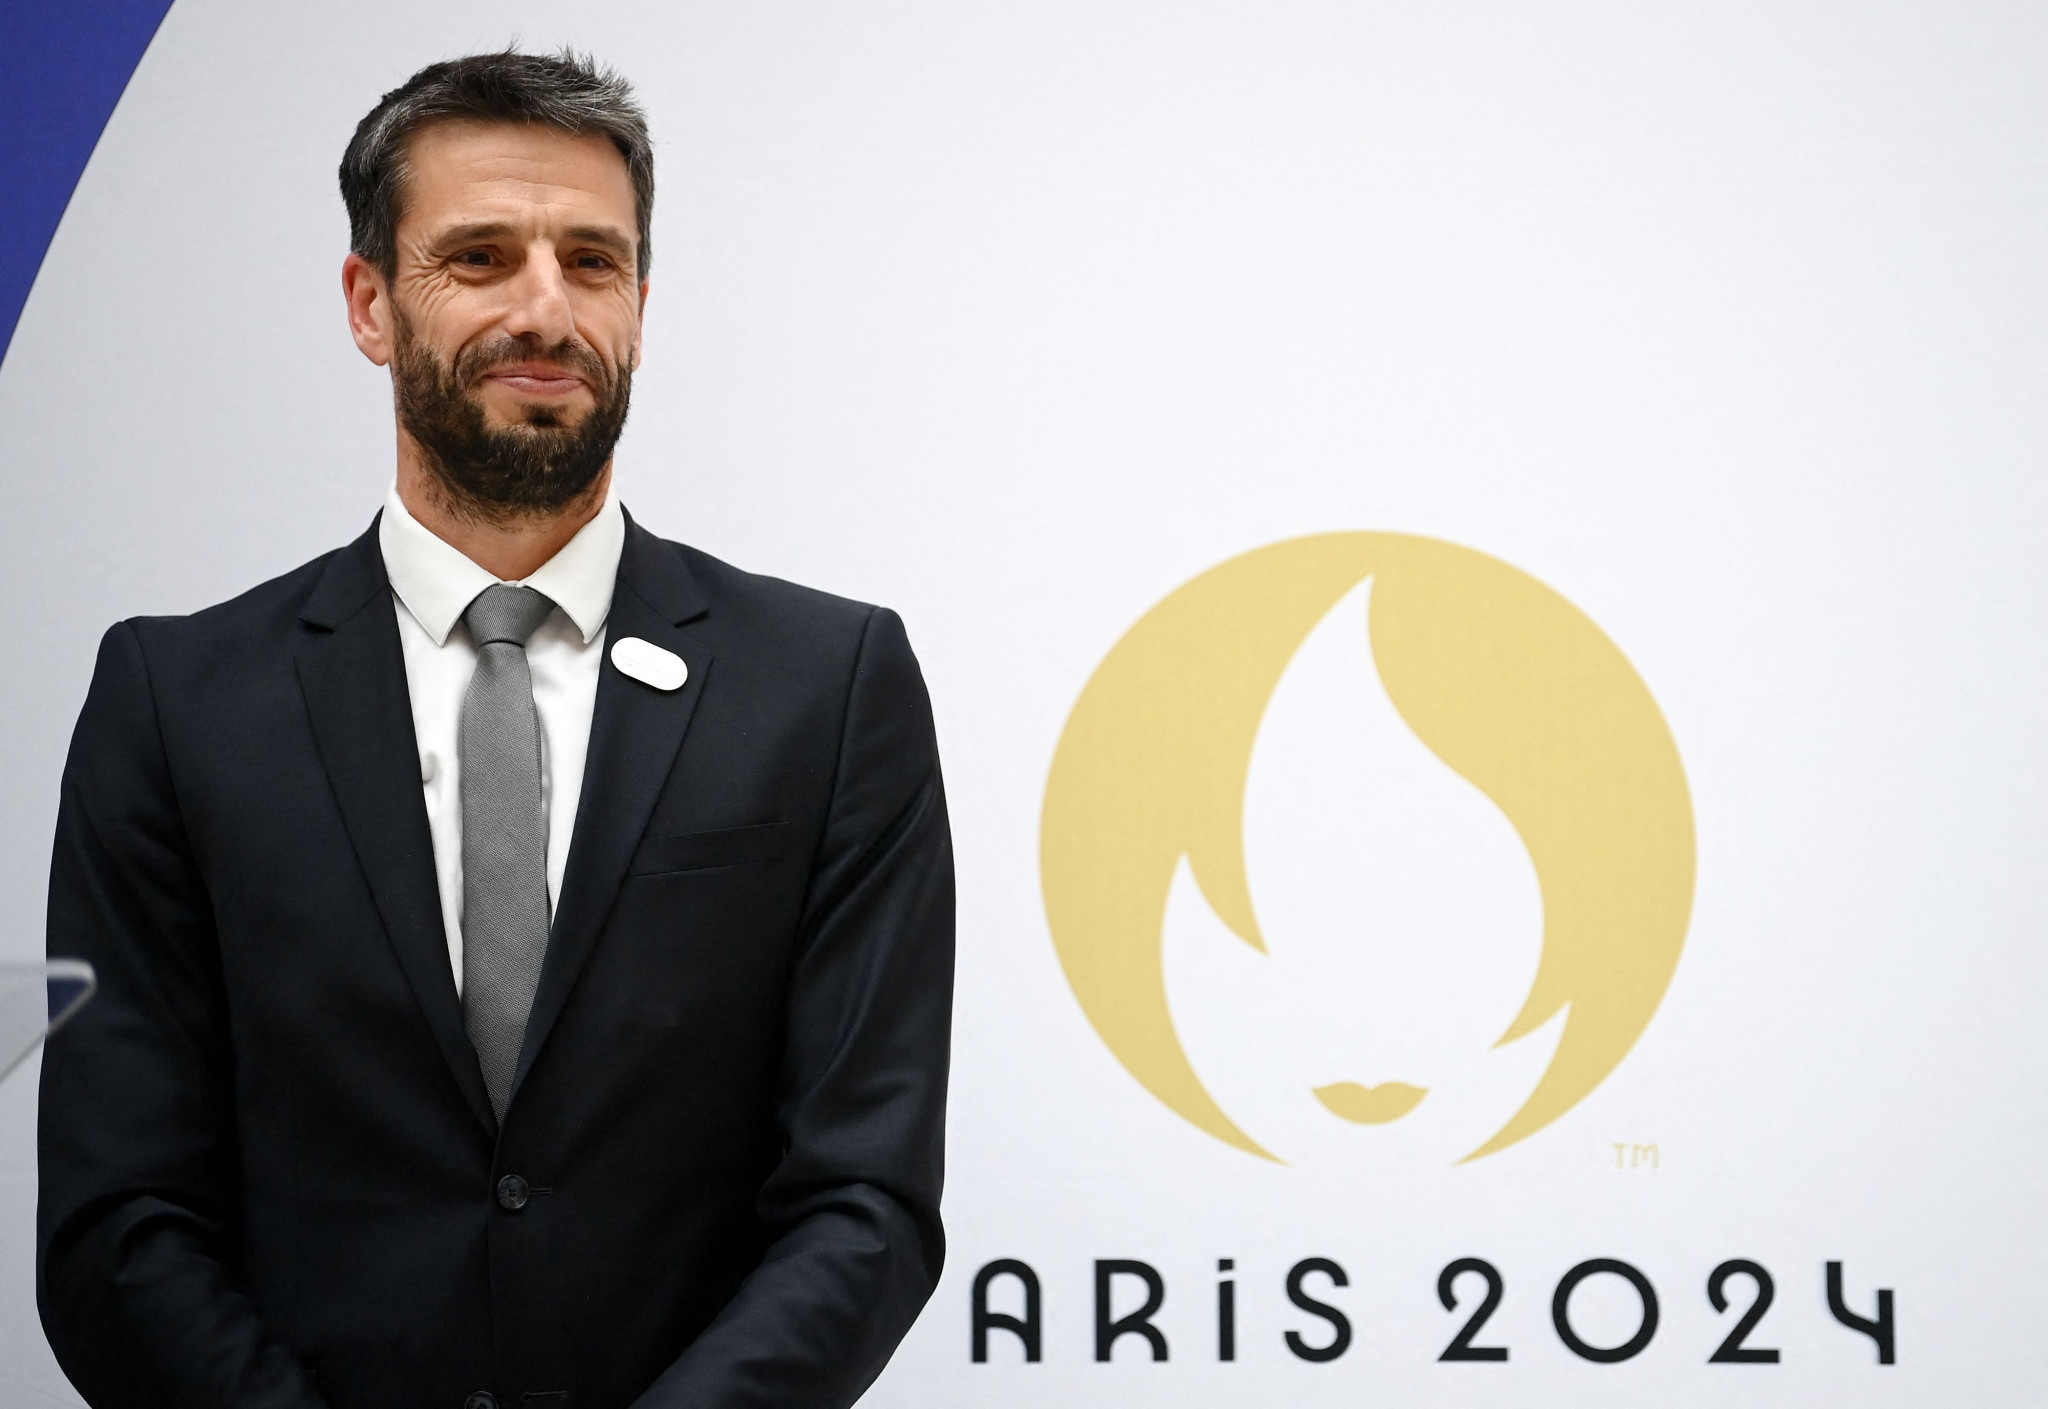 Paris 2024 President Tony Estanguet said it was vital for the next Olympics to be "cool" ©Getty Images